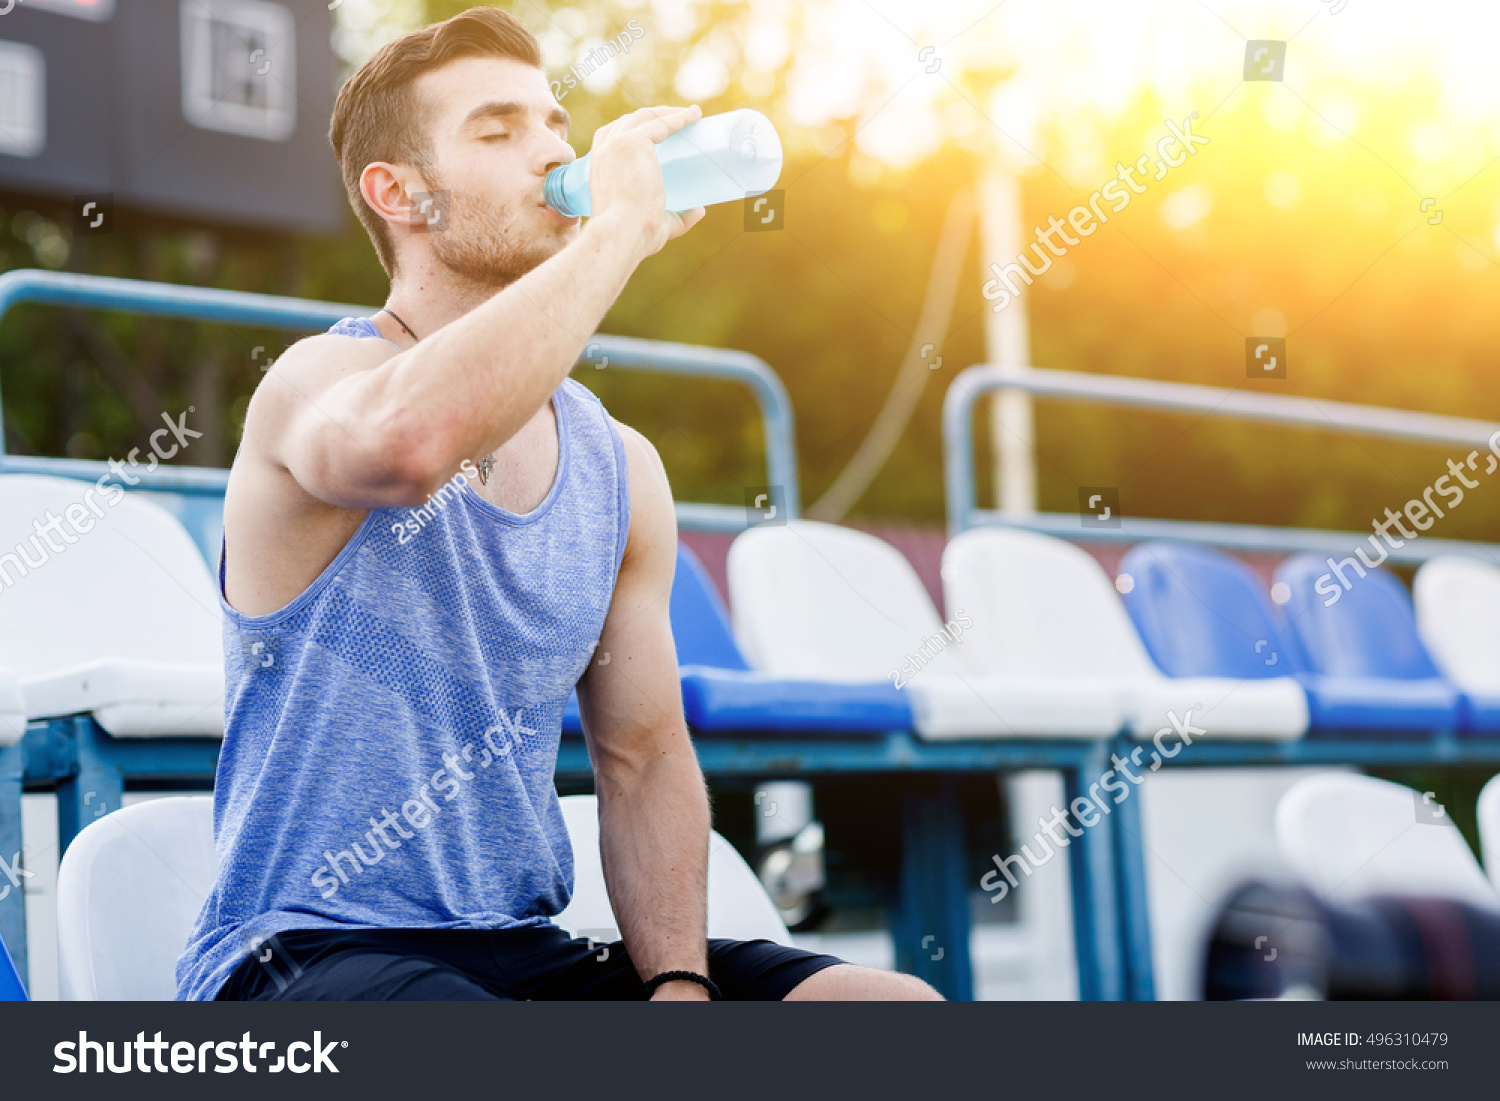 Caucasian man drinking water with his eyes closed after exercises #496310479